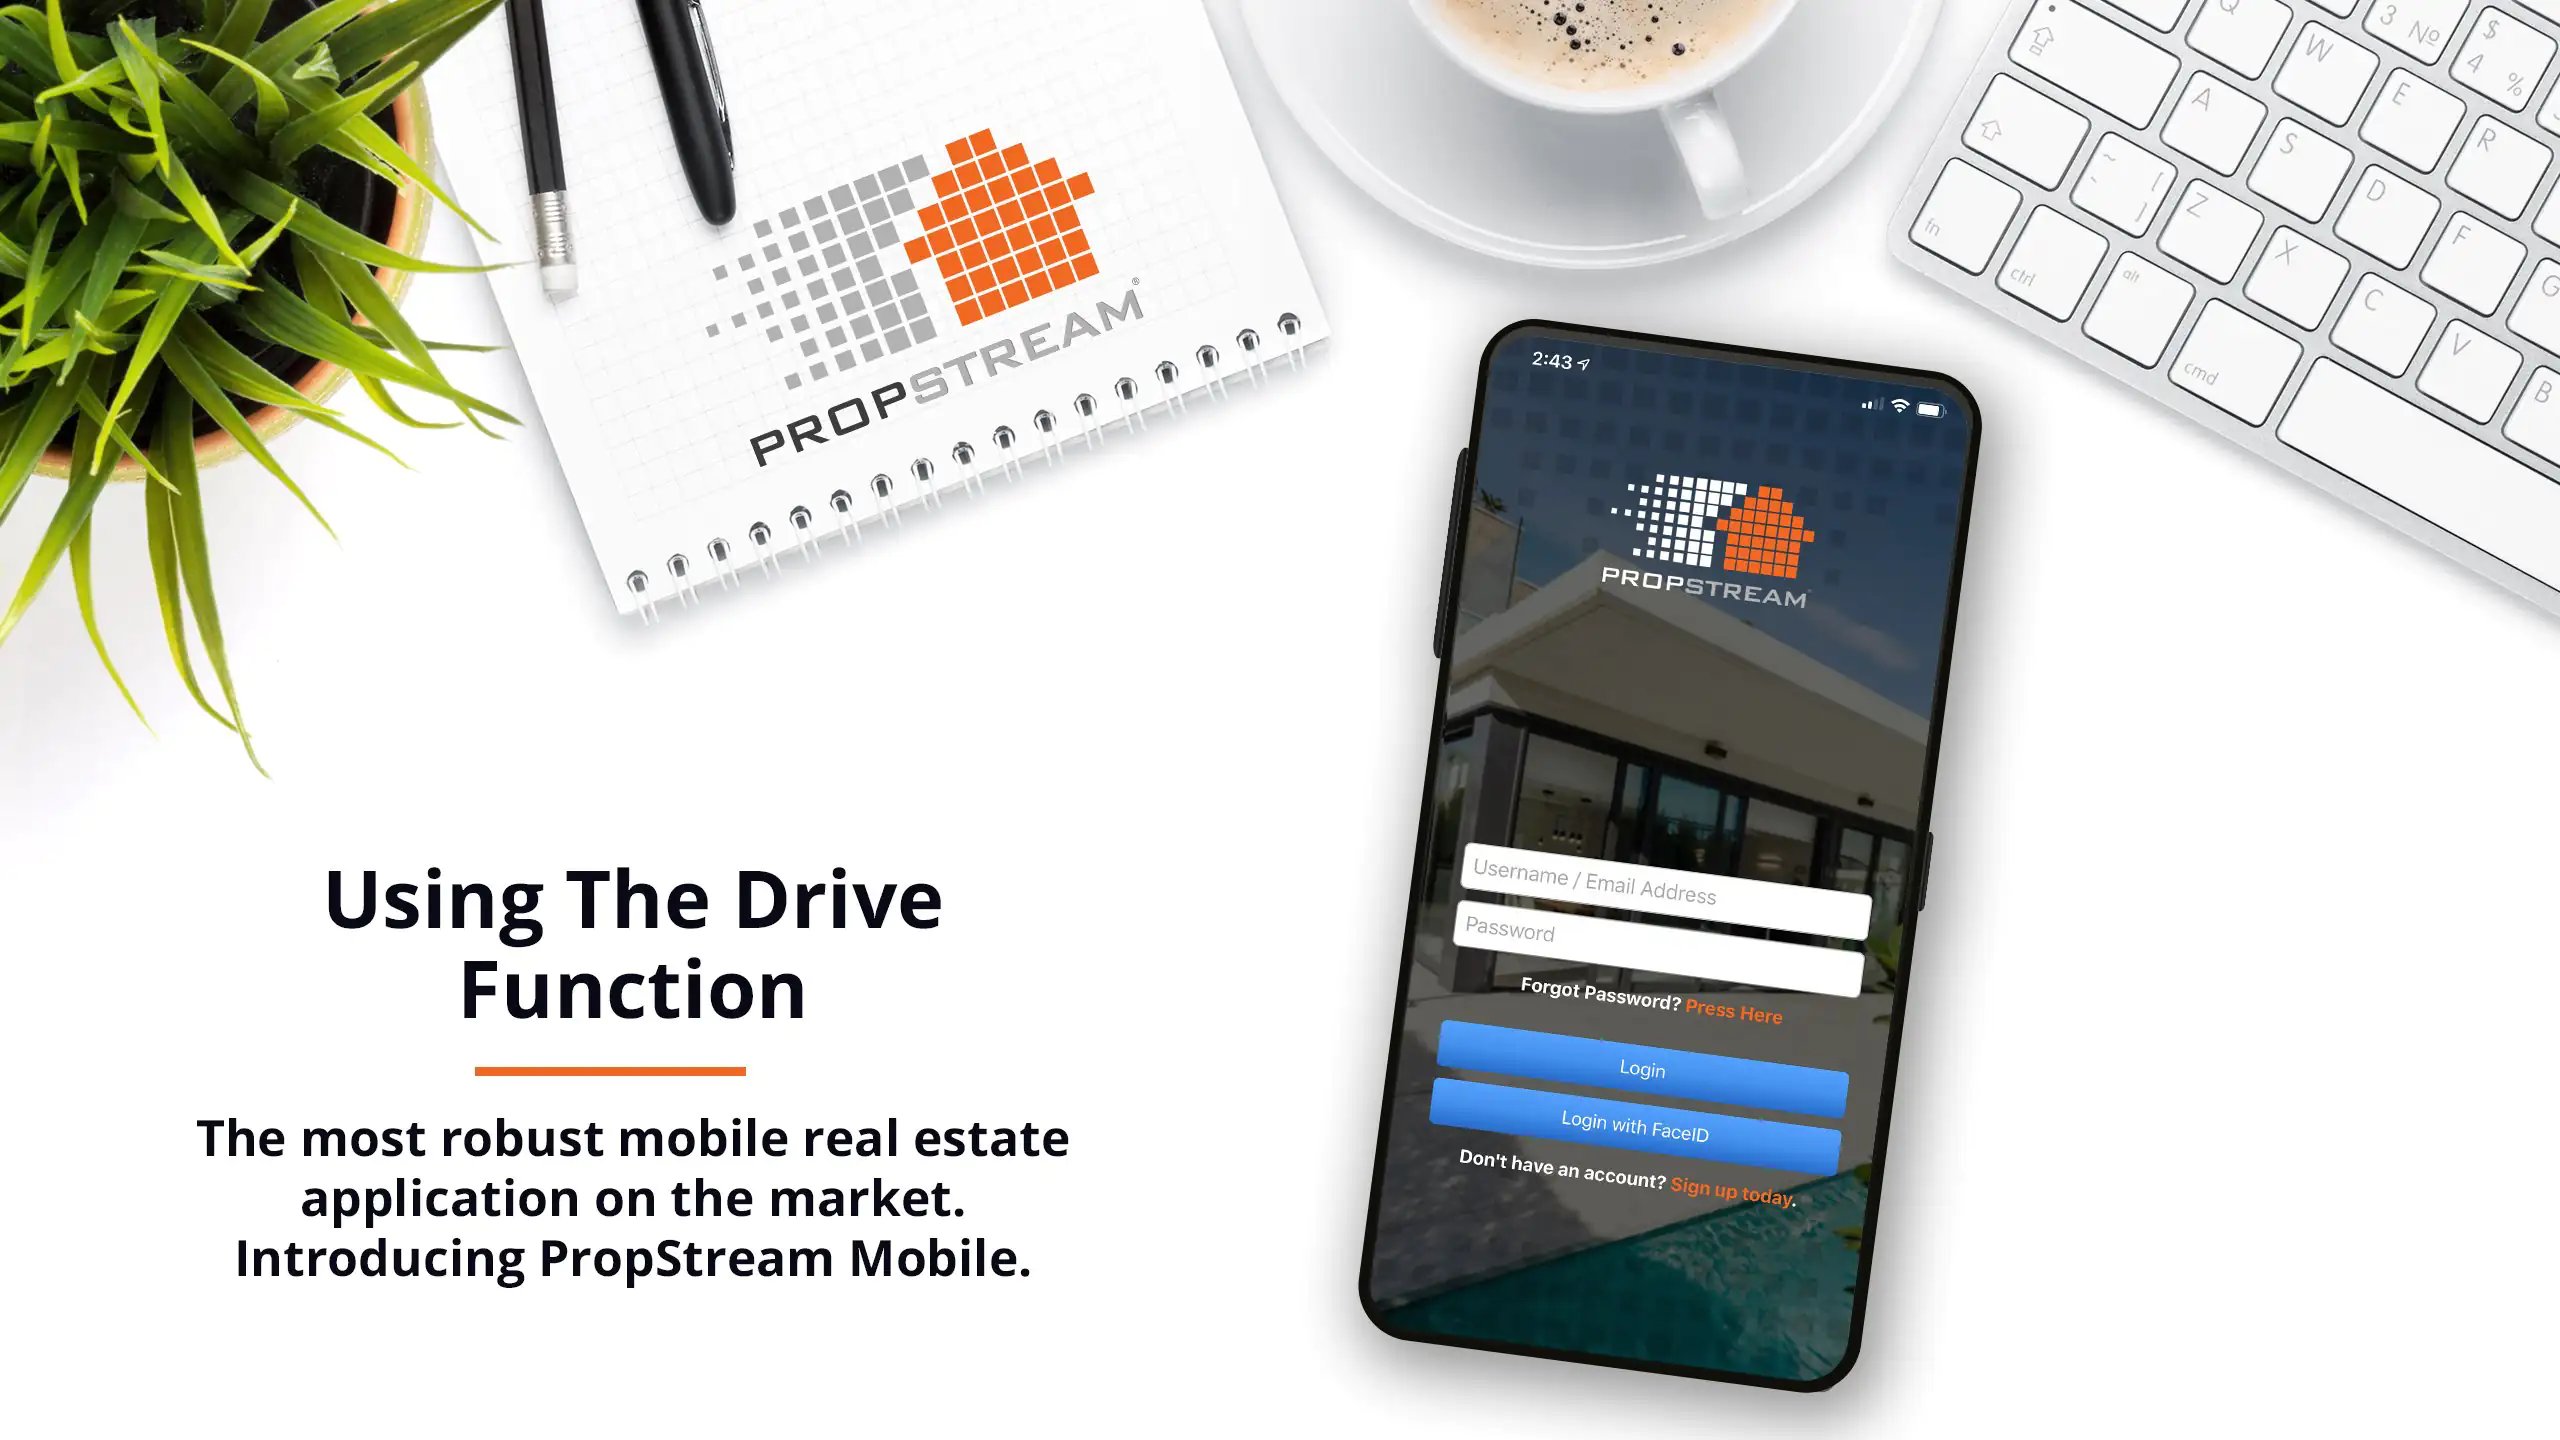 PropStream Mobile - Using the Drive function